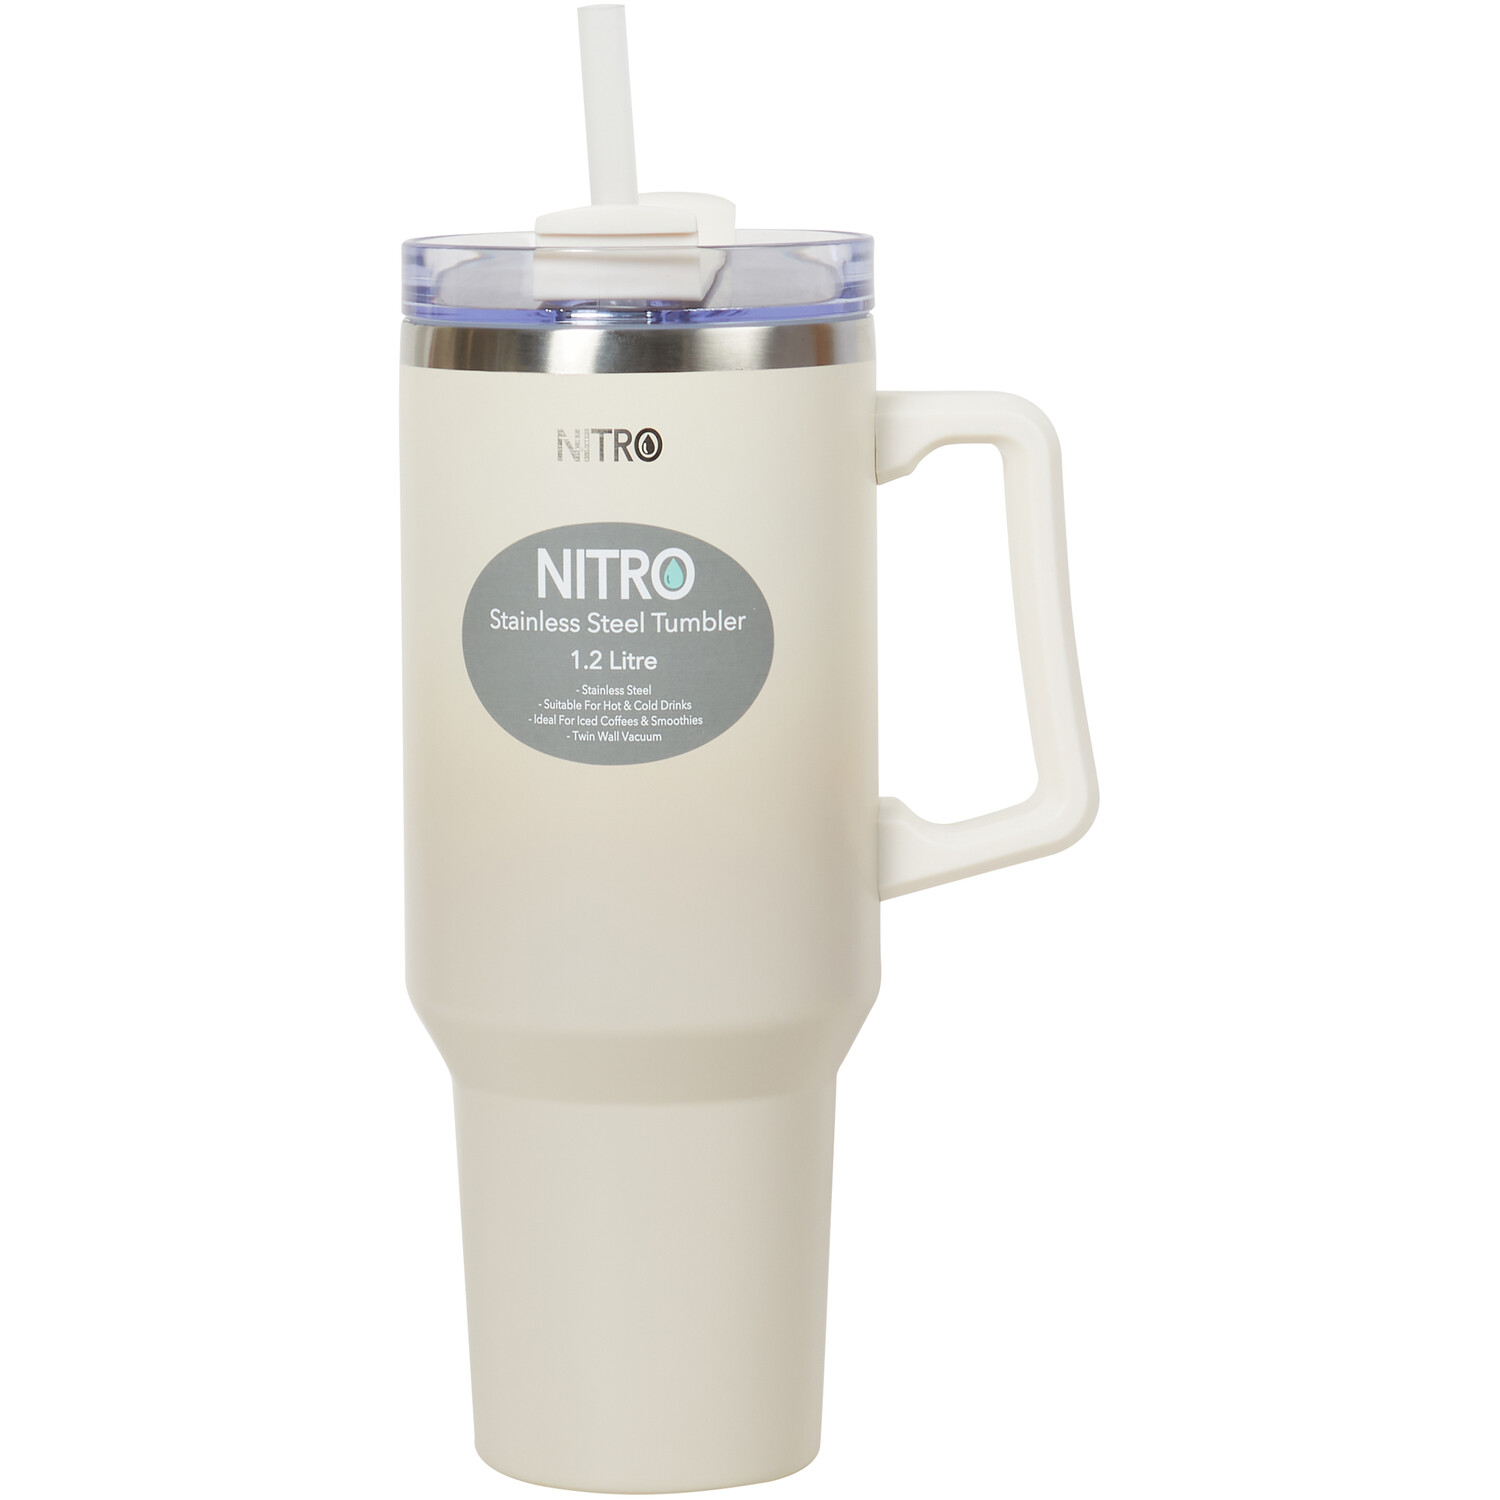 Nitro Neutrals Ombre Stainless Steel Tumbler Image 1